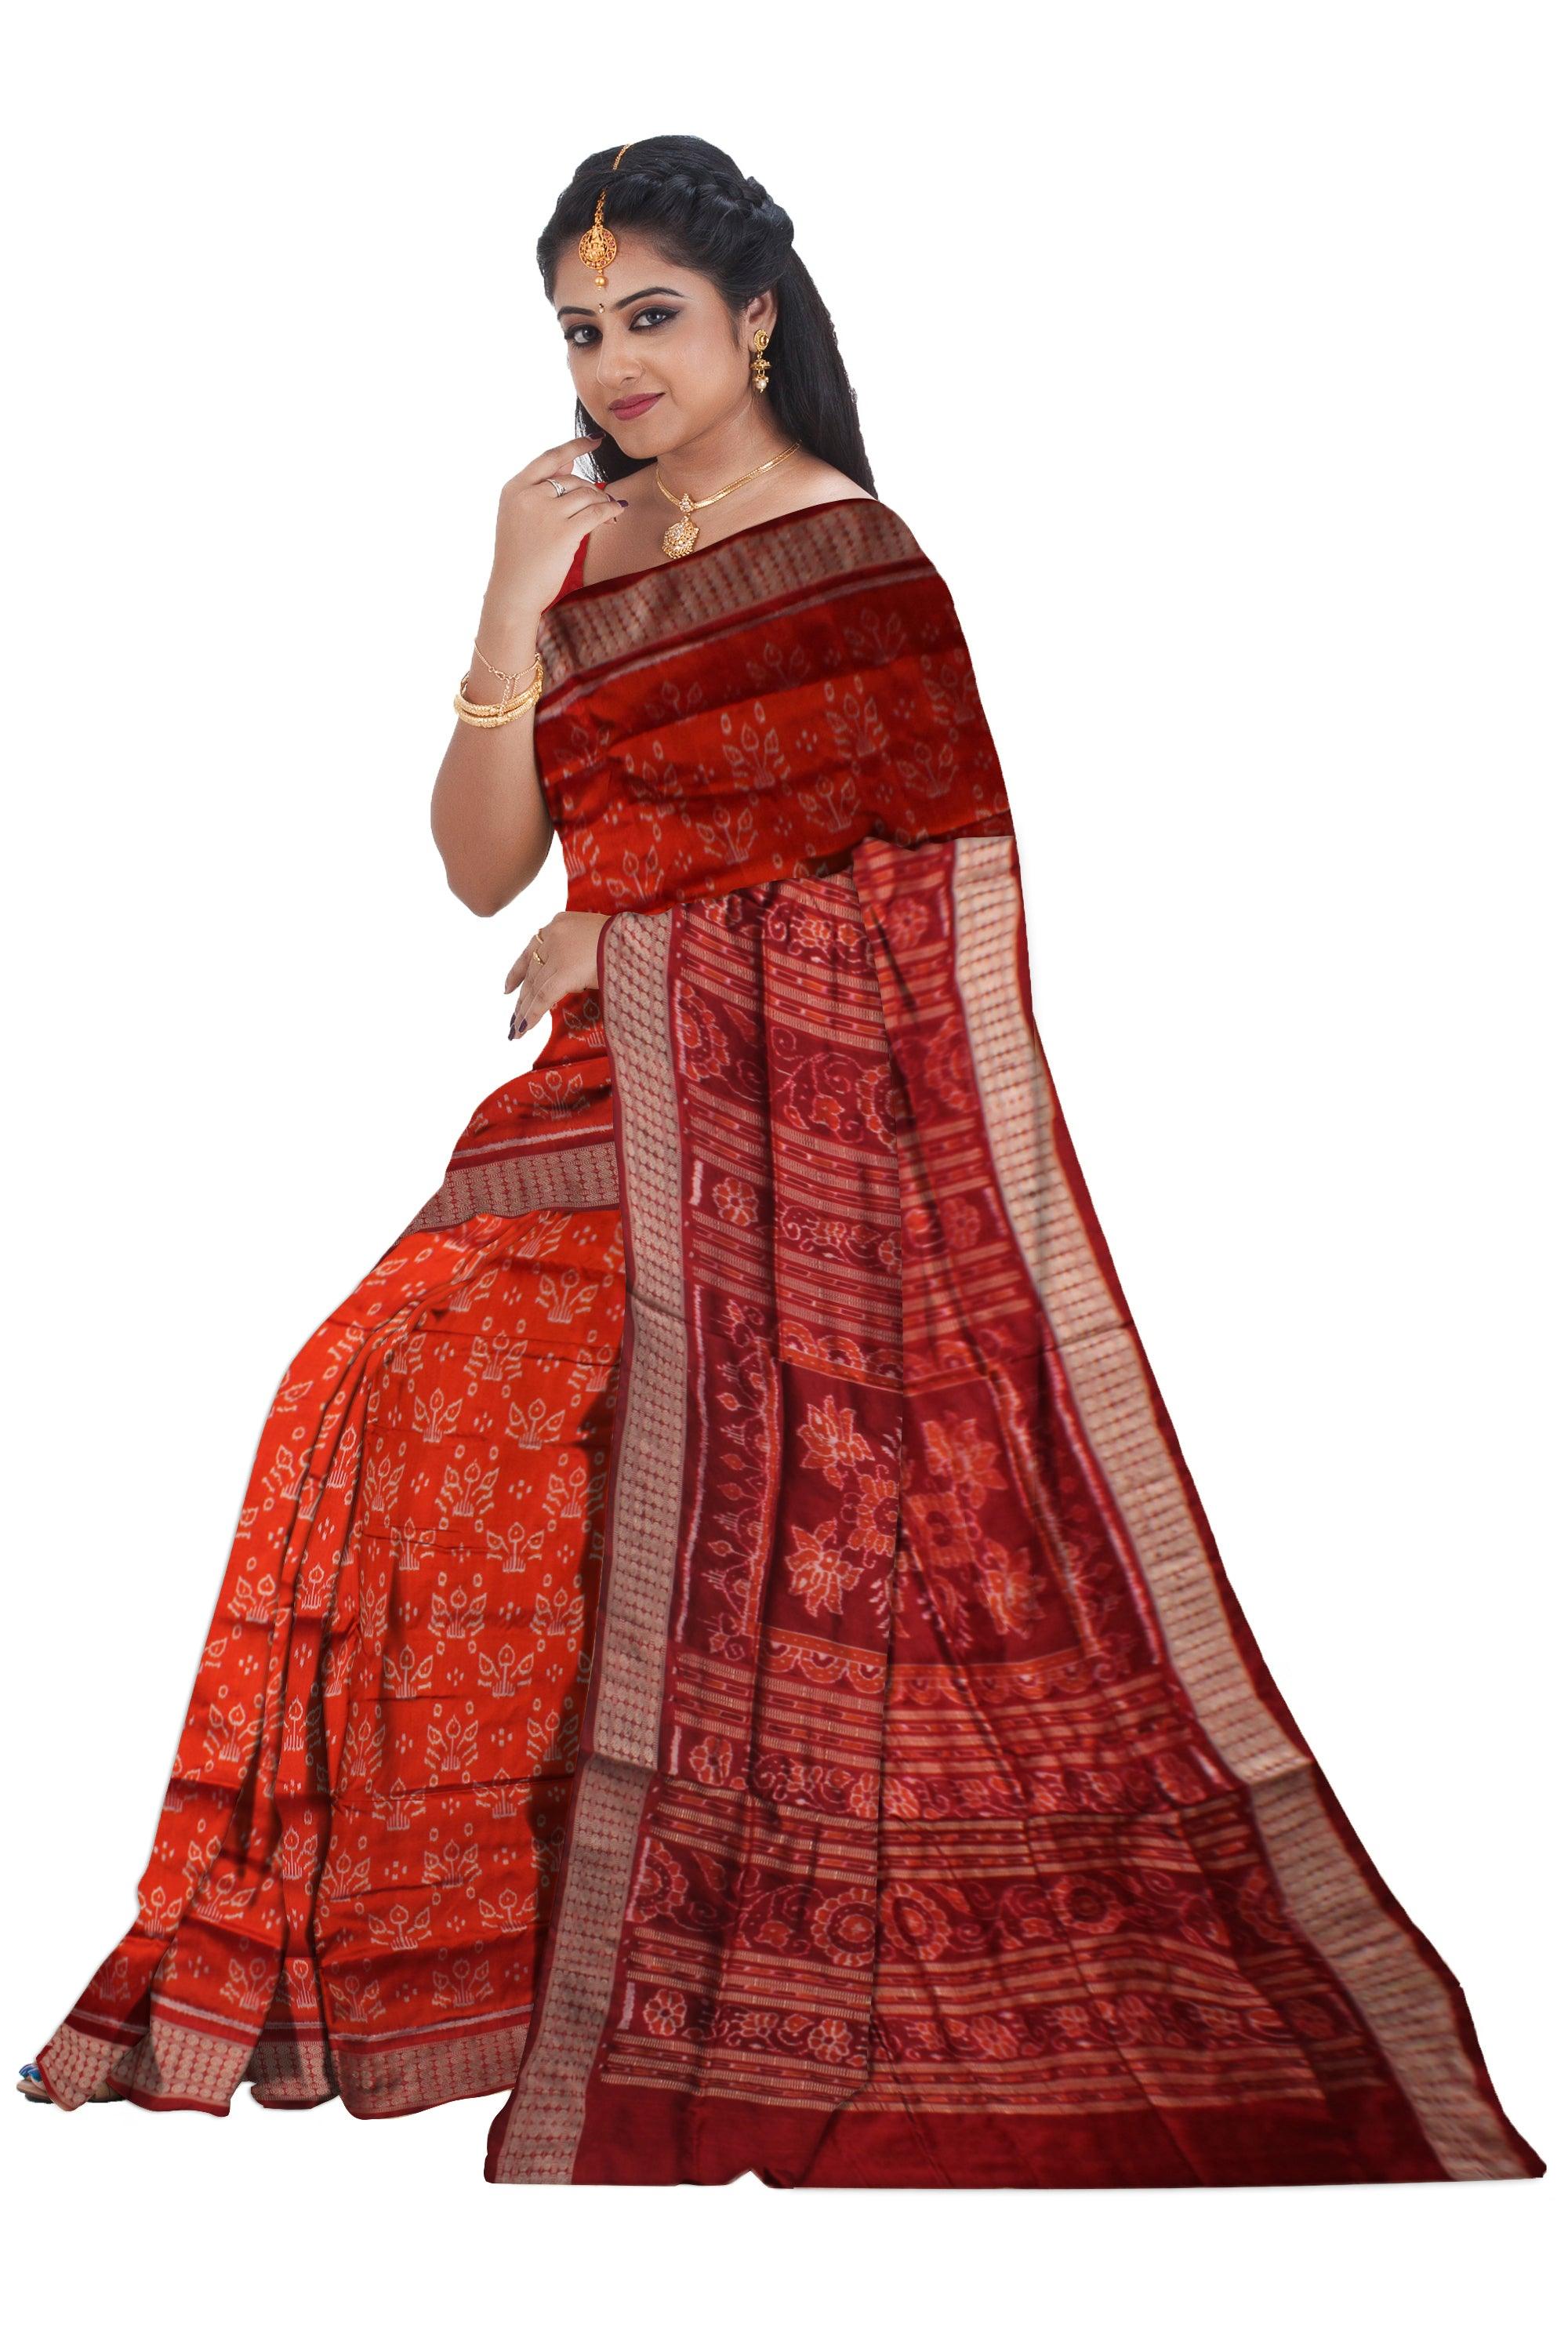 MARRIAGE COLLECTION PURE SILK SAREE IN ORANGE AND MAROON COLOR BASE, COMES WITH BLOUSE PIECE. - Koshali Arts & Crafts Enterprise